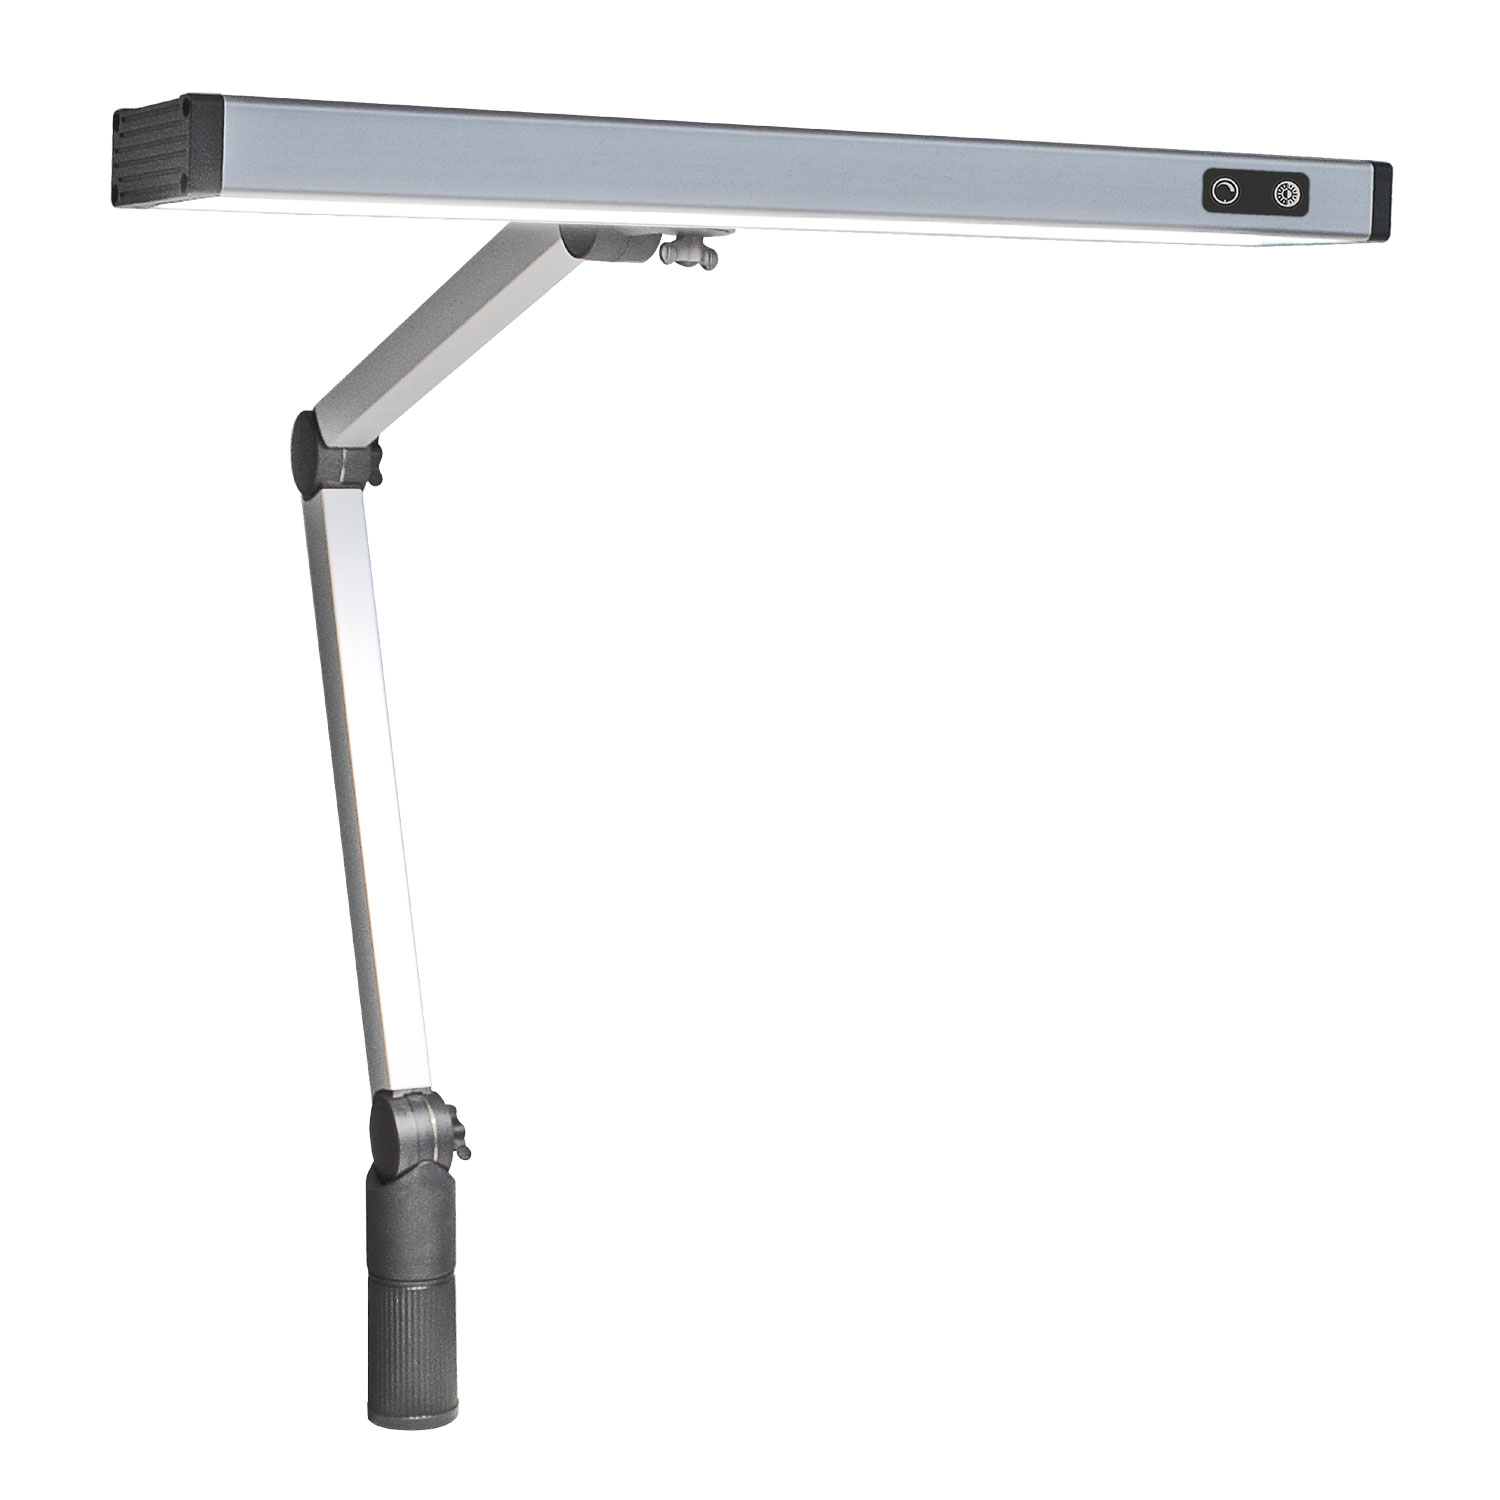 LED workplace light UNILED II TUNABLE WHITE articulated arm, 28W, 3000~6500K, light width 548 mm - DIMMABLE